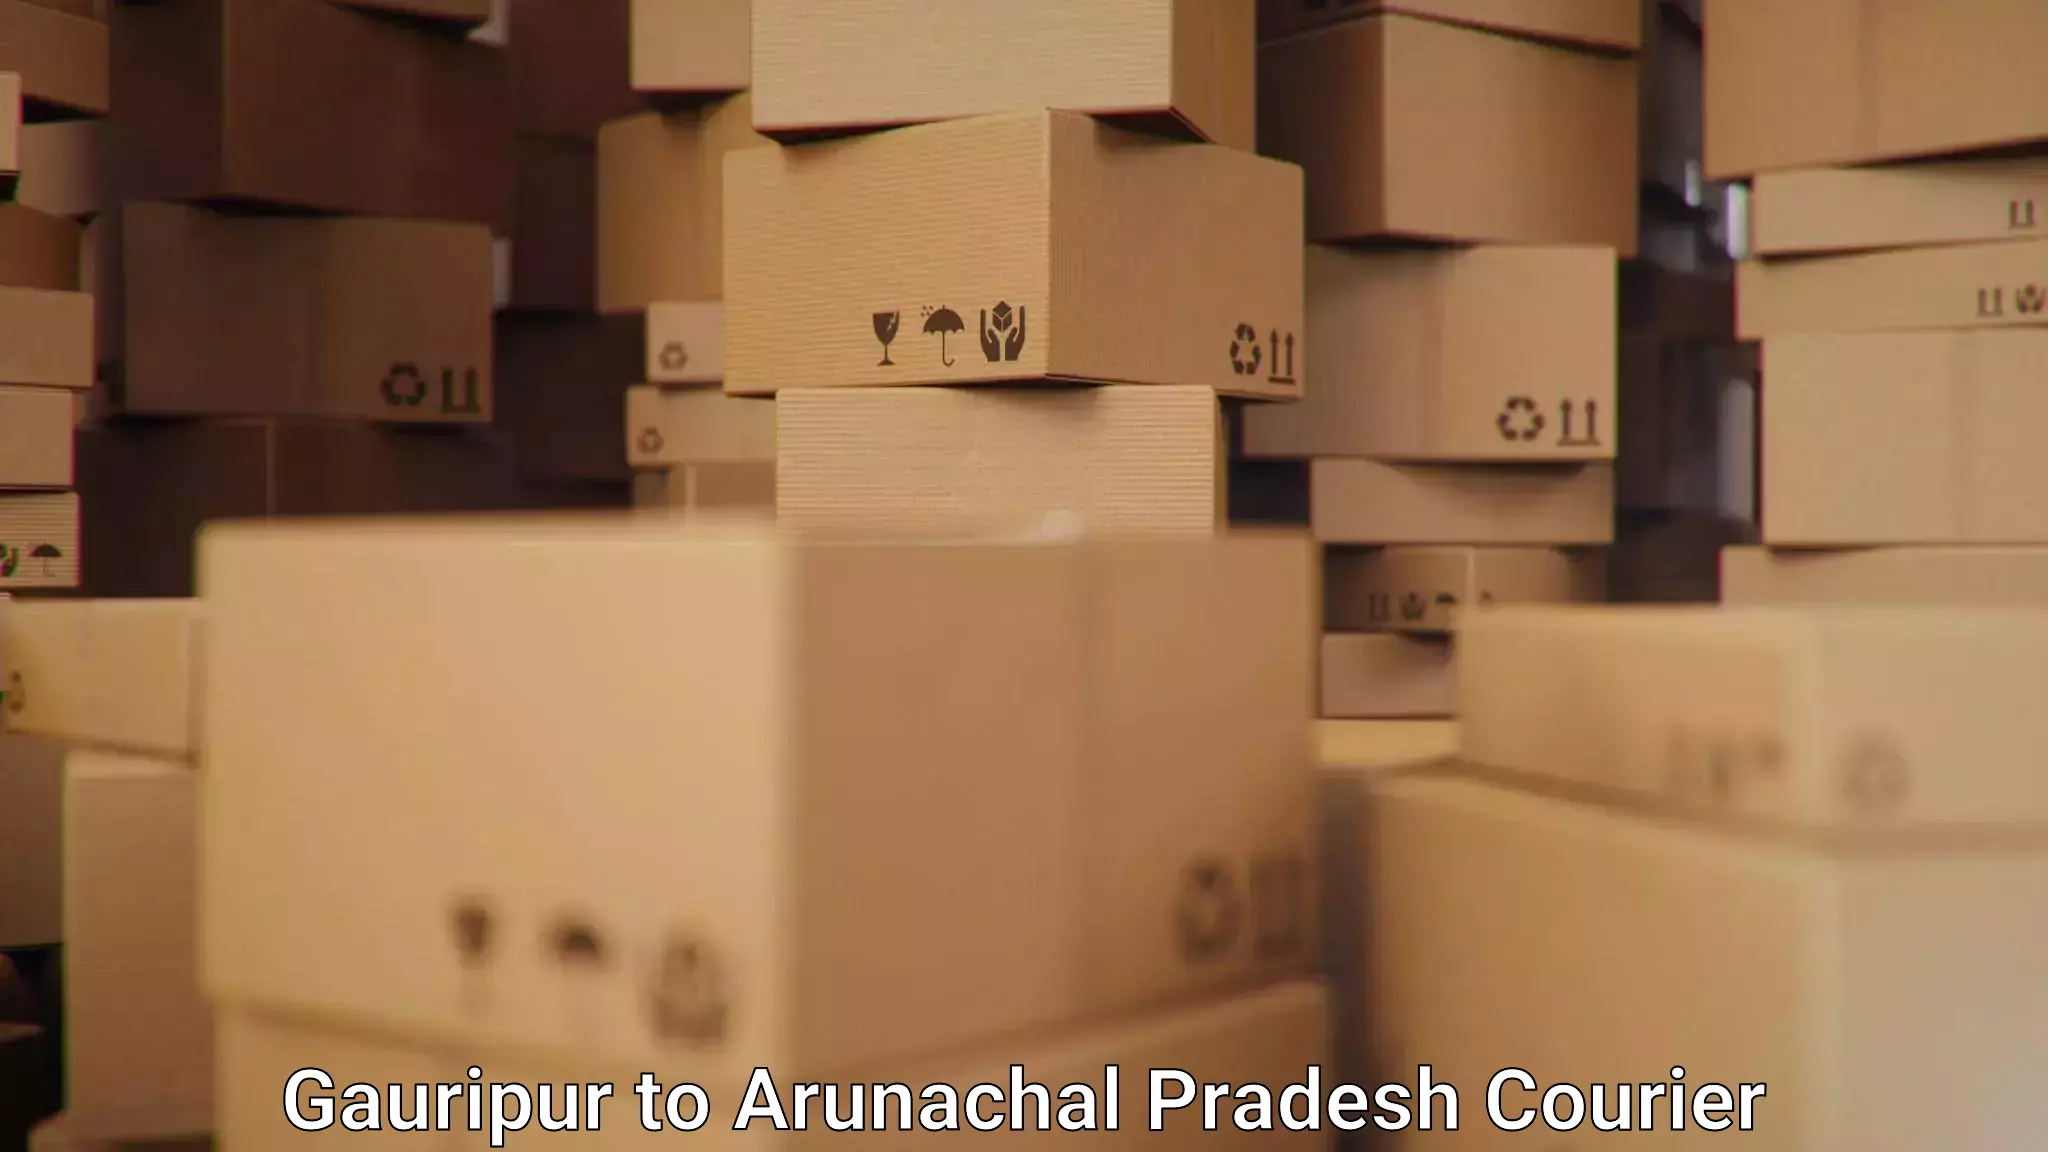 Subscription-based courier Gauripur to Deomali